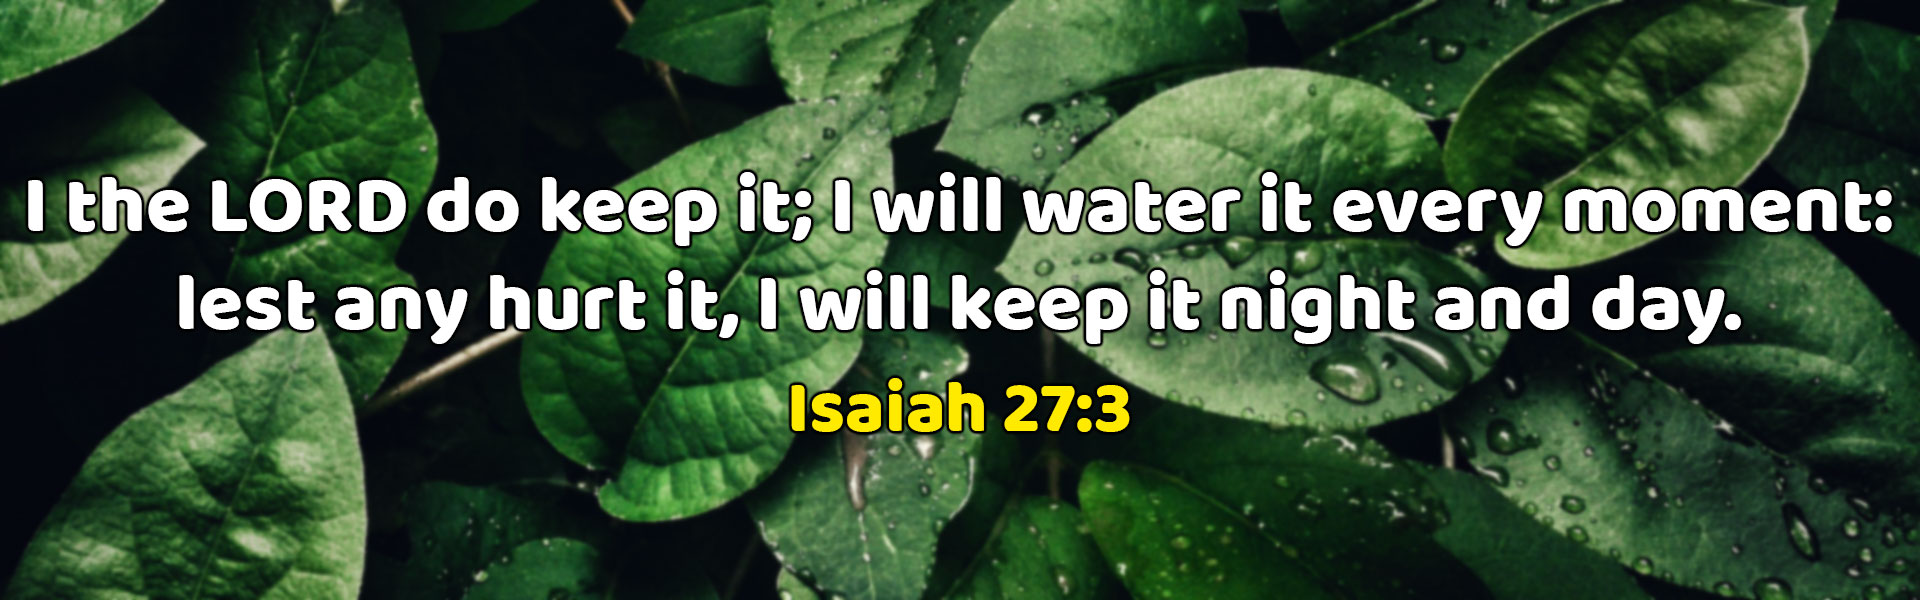 I the LORD do keep it; I will water it every moment: lest any hurt it, I will keep it night and day. Isaiah-27-3 | Zion Prayer House Poranki